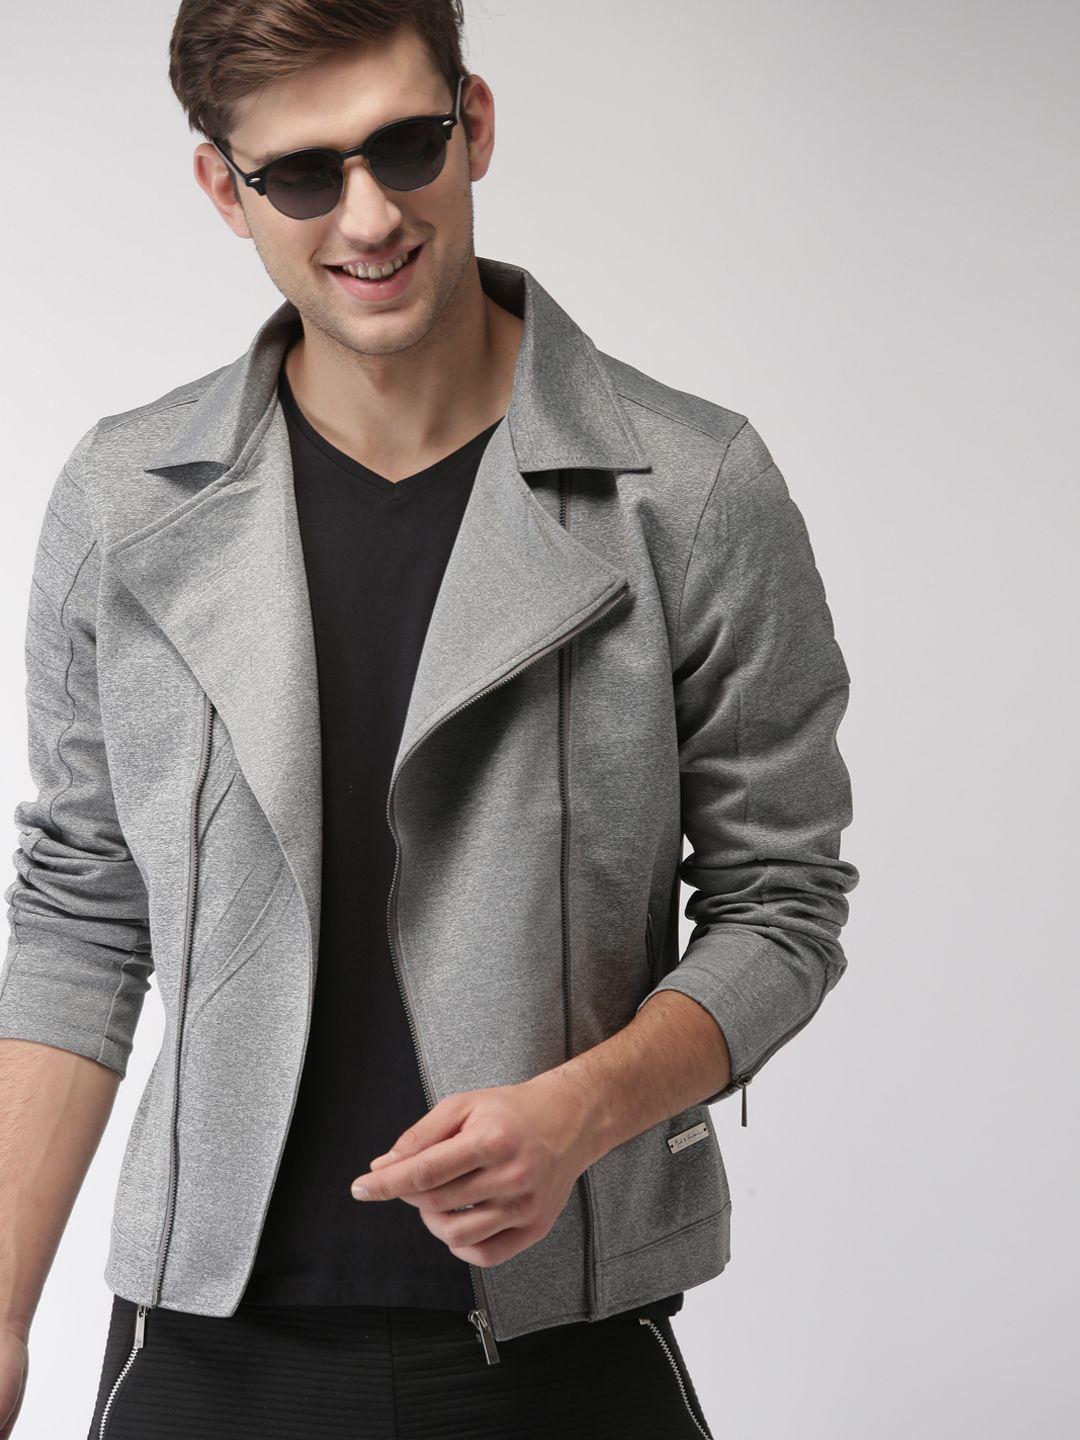 mast & harbour men charcoal grey solid tailored jacket